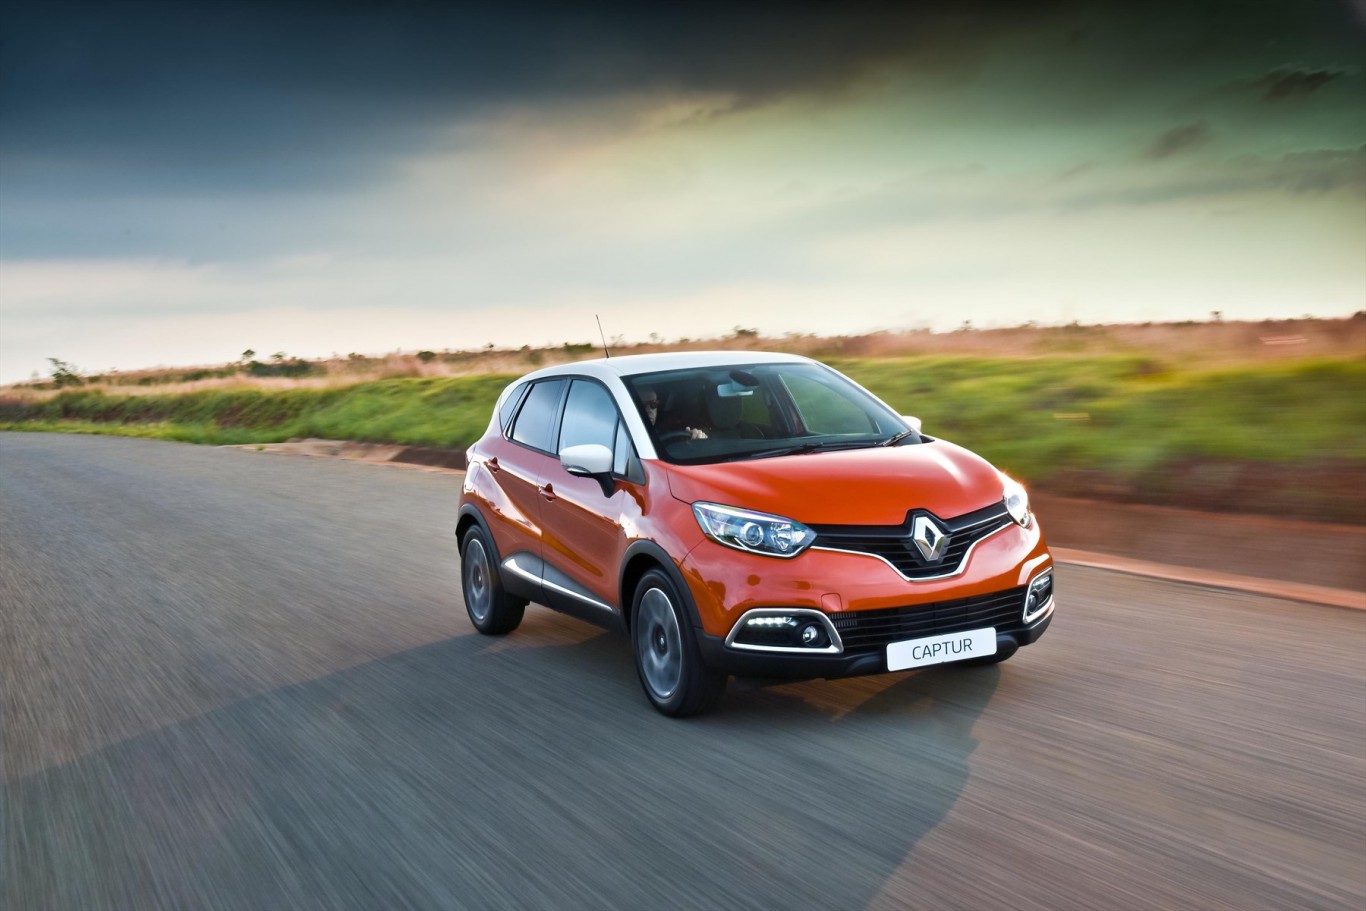 Captur Sunset Limited Edition Dynamique powered by Renault's dynamic 1.5 dCi 66kW Turbo Diesel